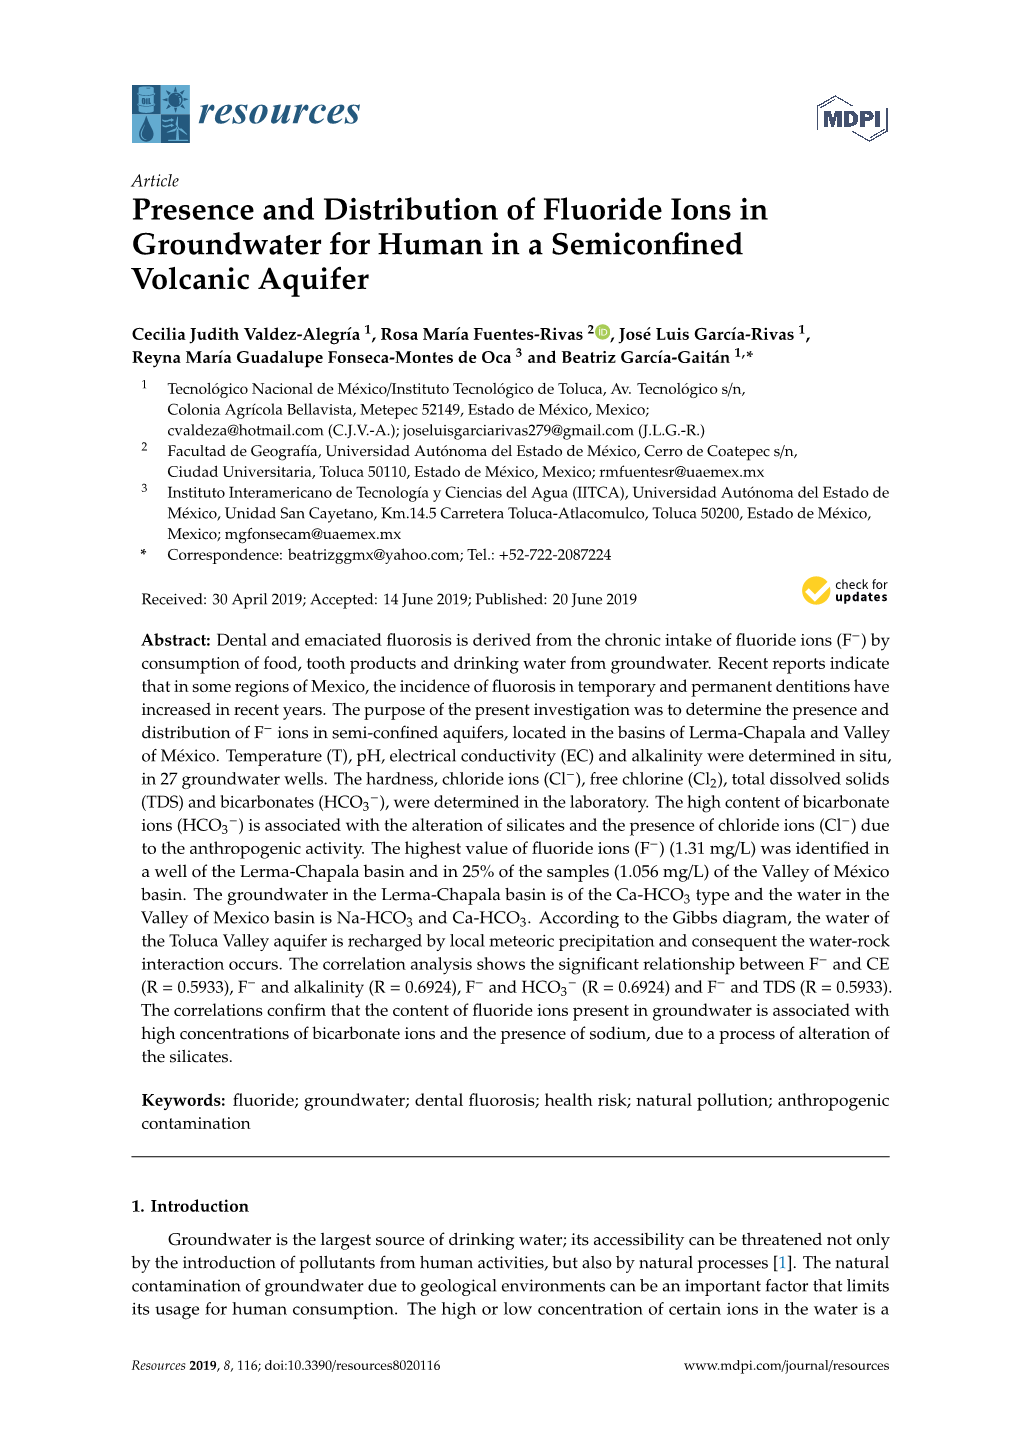 Presence and Distribution of Fluoride Ions in Groundwater for Human in a Semiconﬁned Volcanic Aquifer